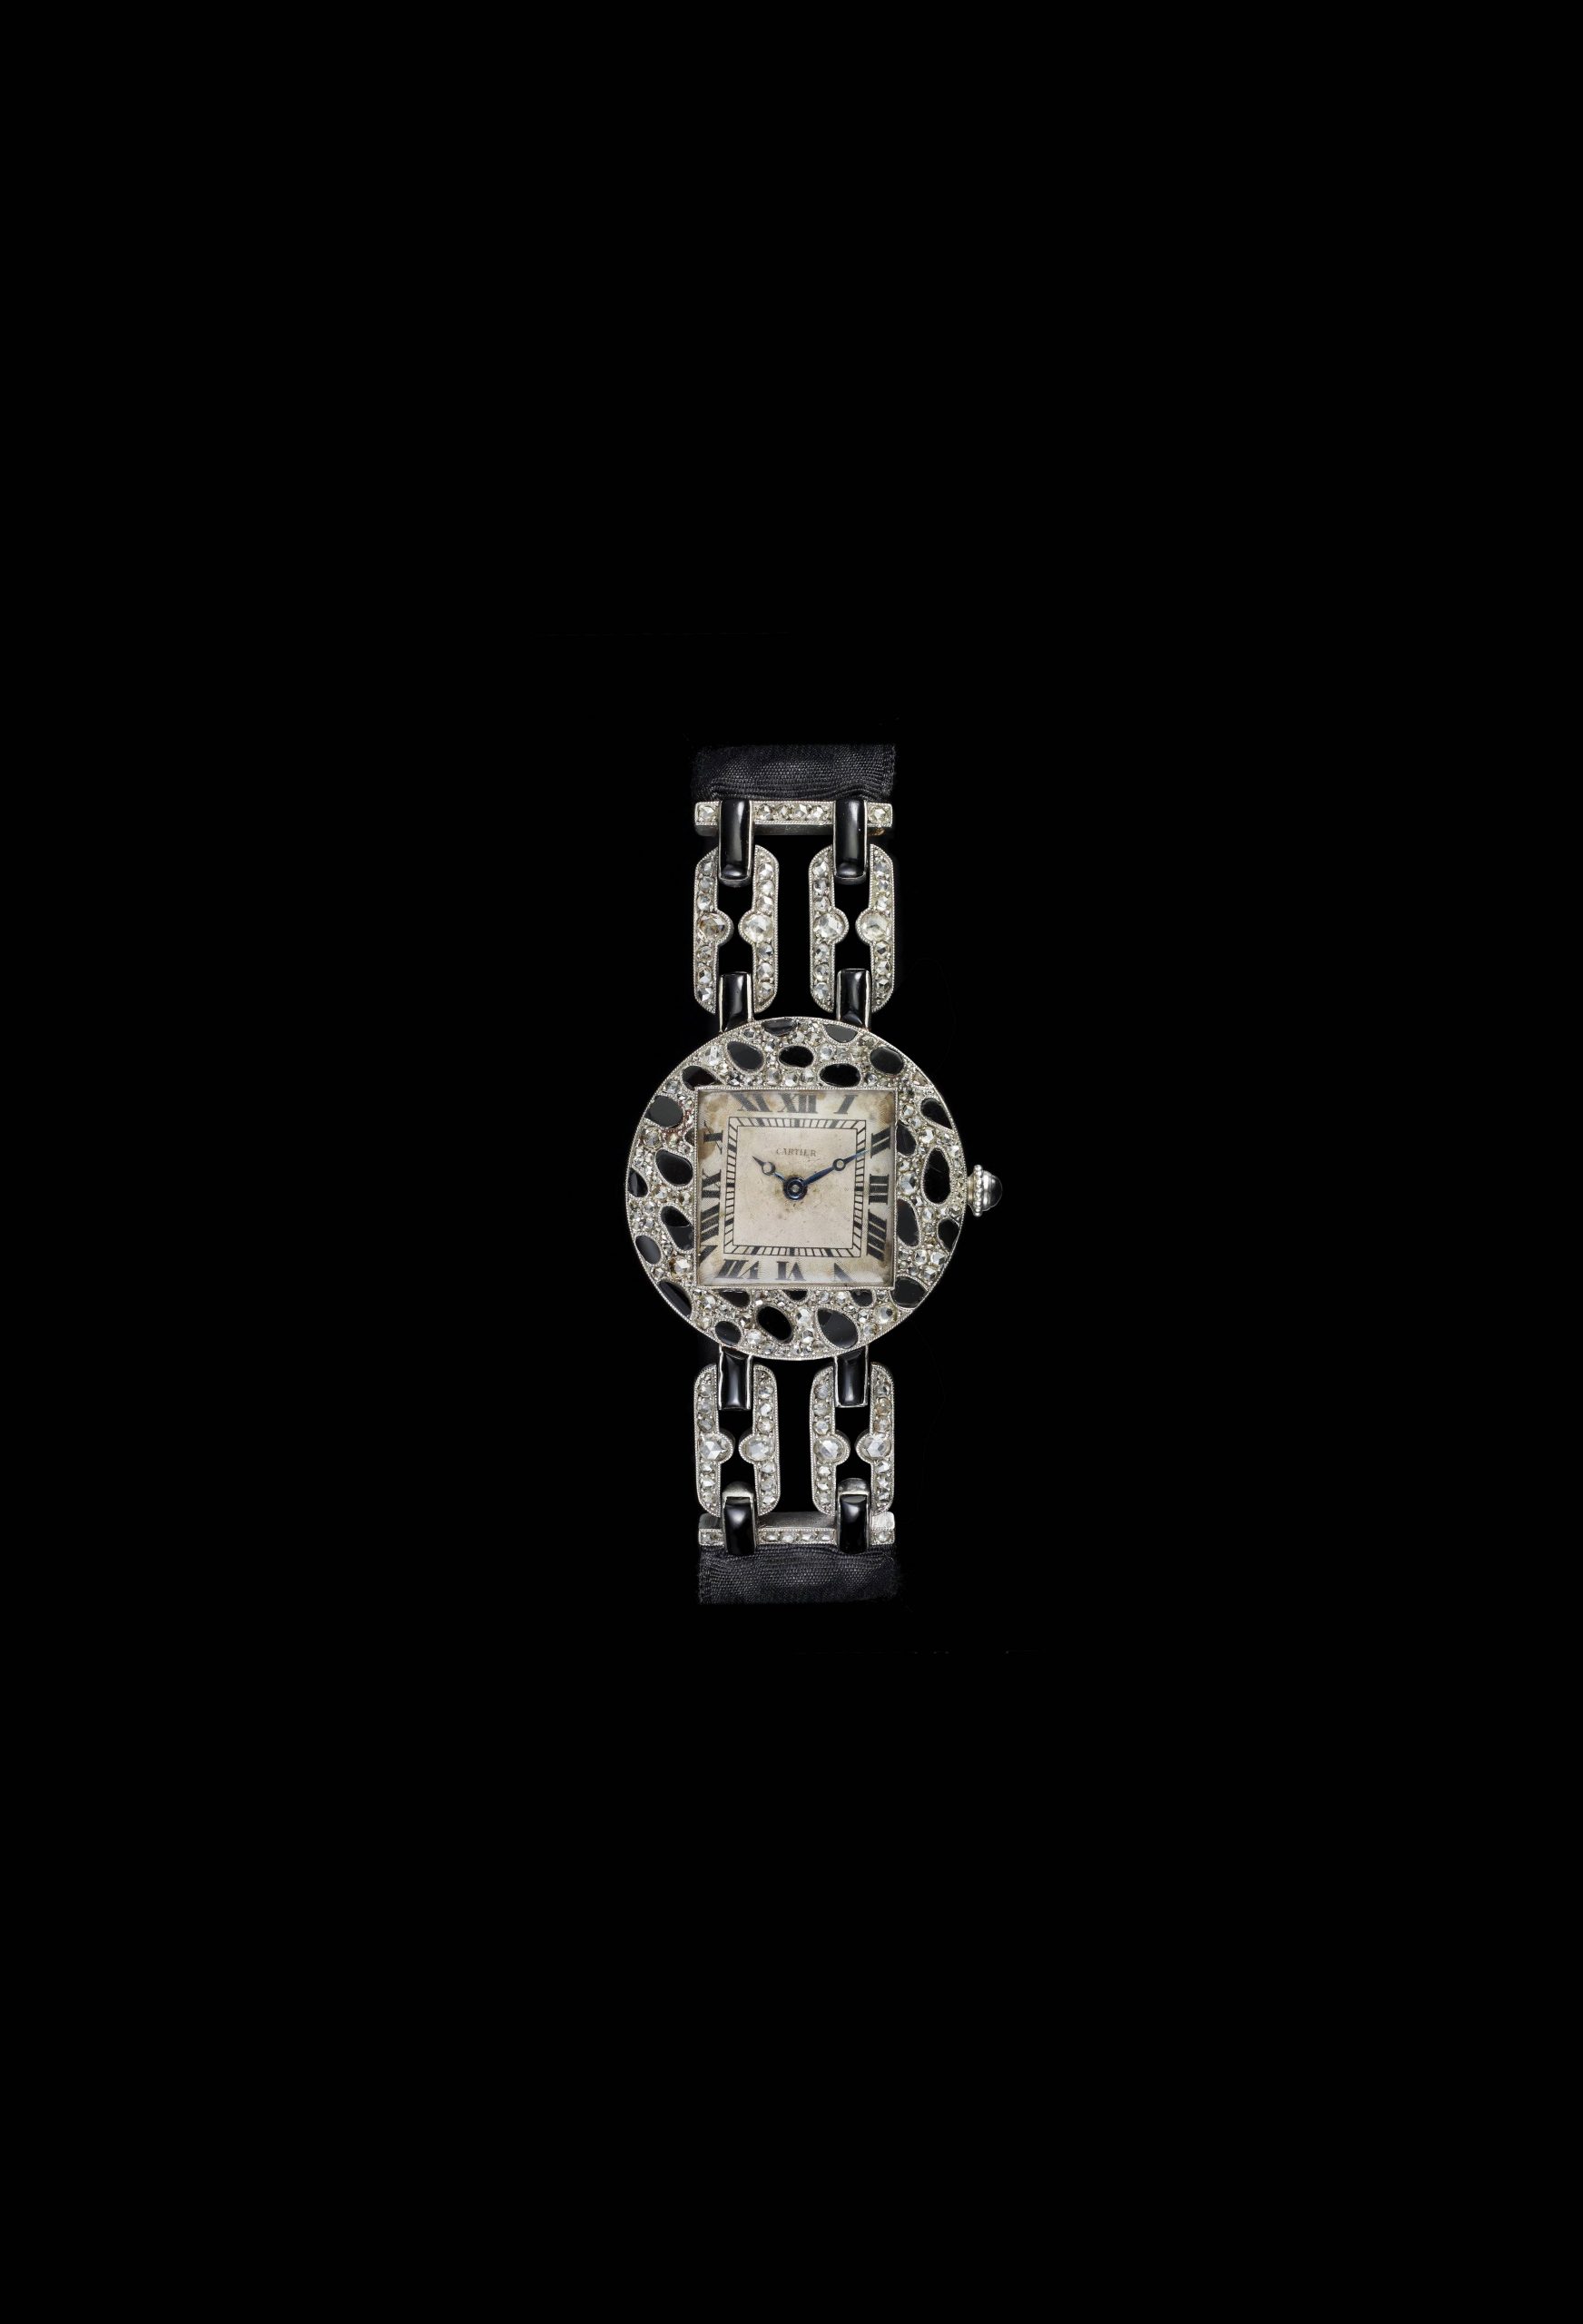 Cartier's very first use of the panther motif, platinum, pink gold, rose-cut diamonds, onyx with moire strap.